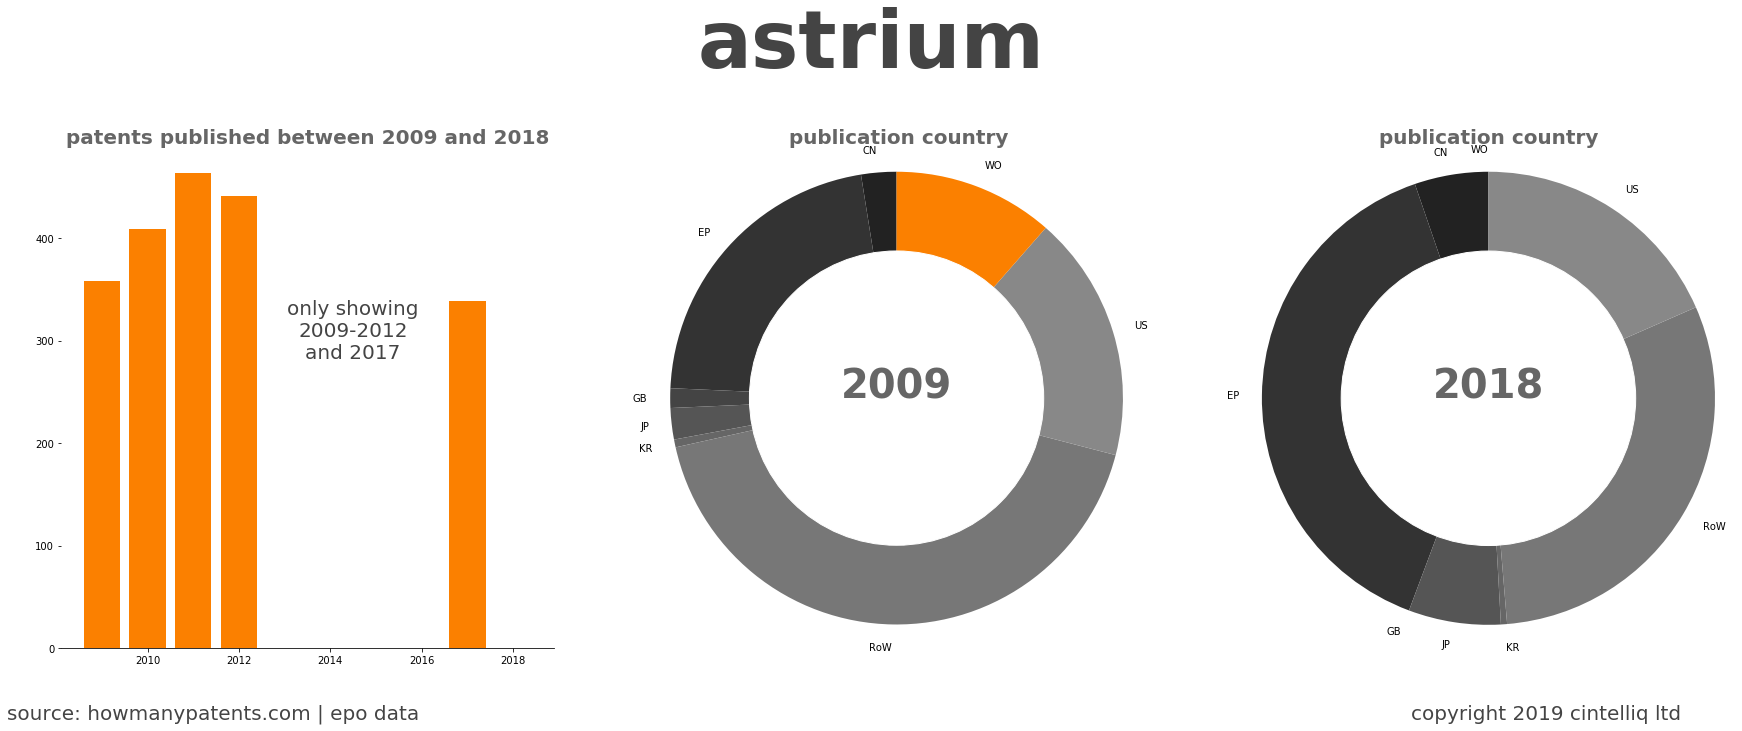 summary of patents for Astrium